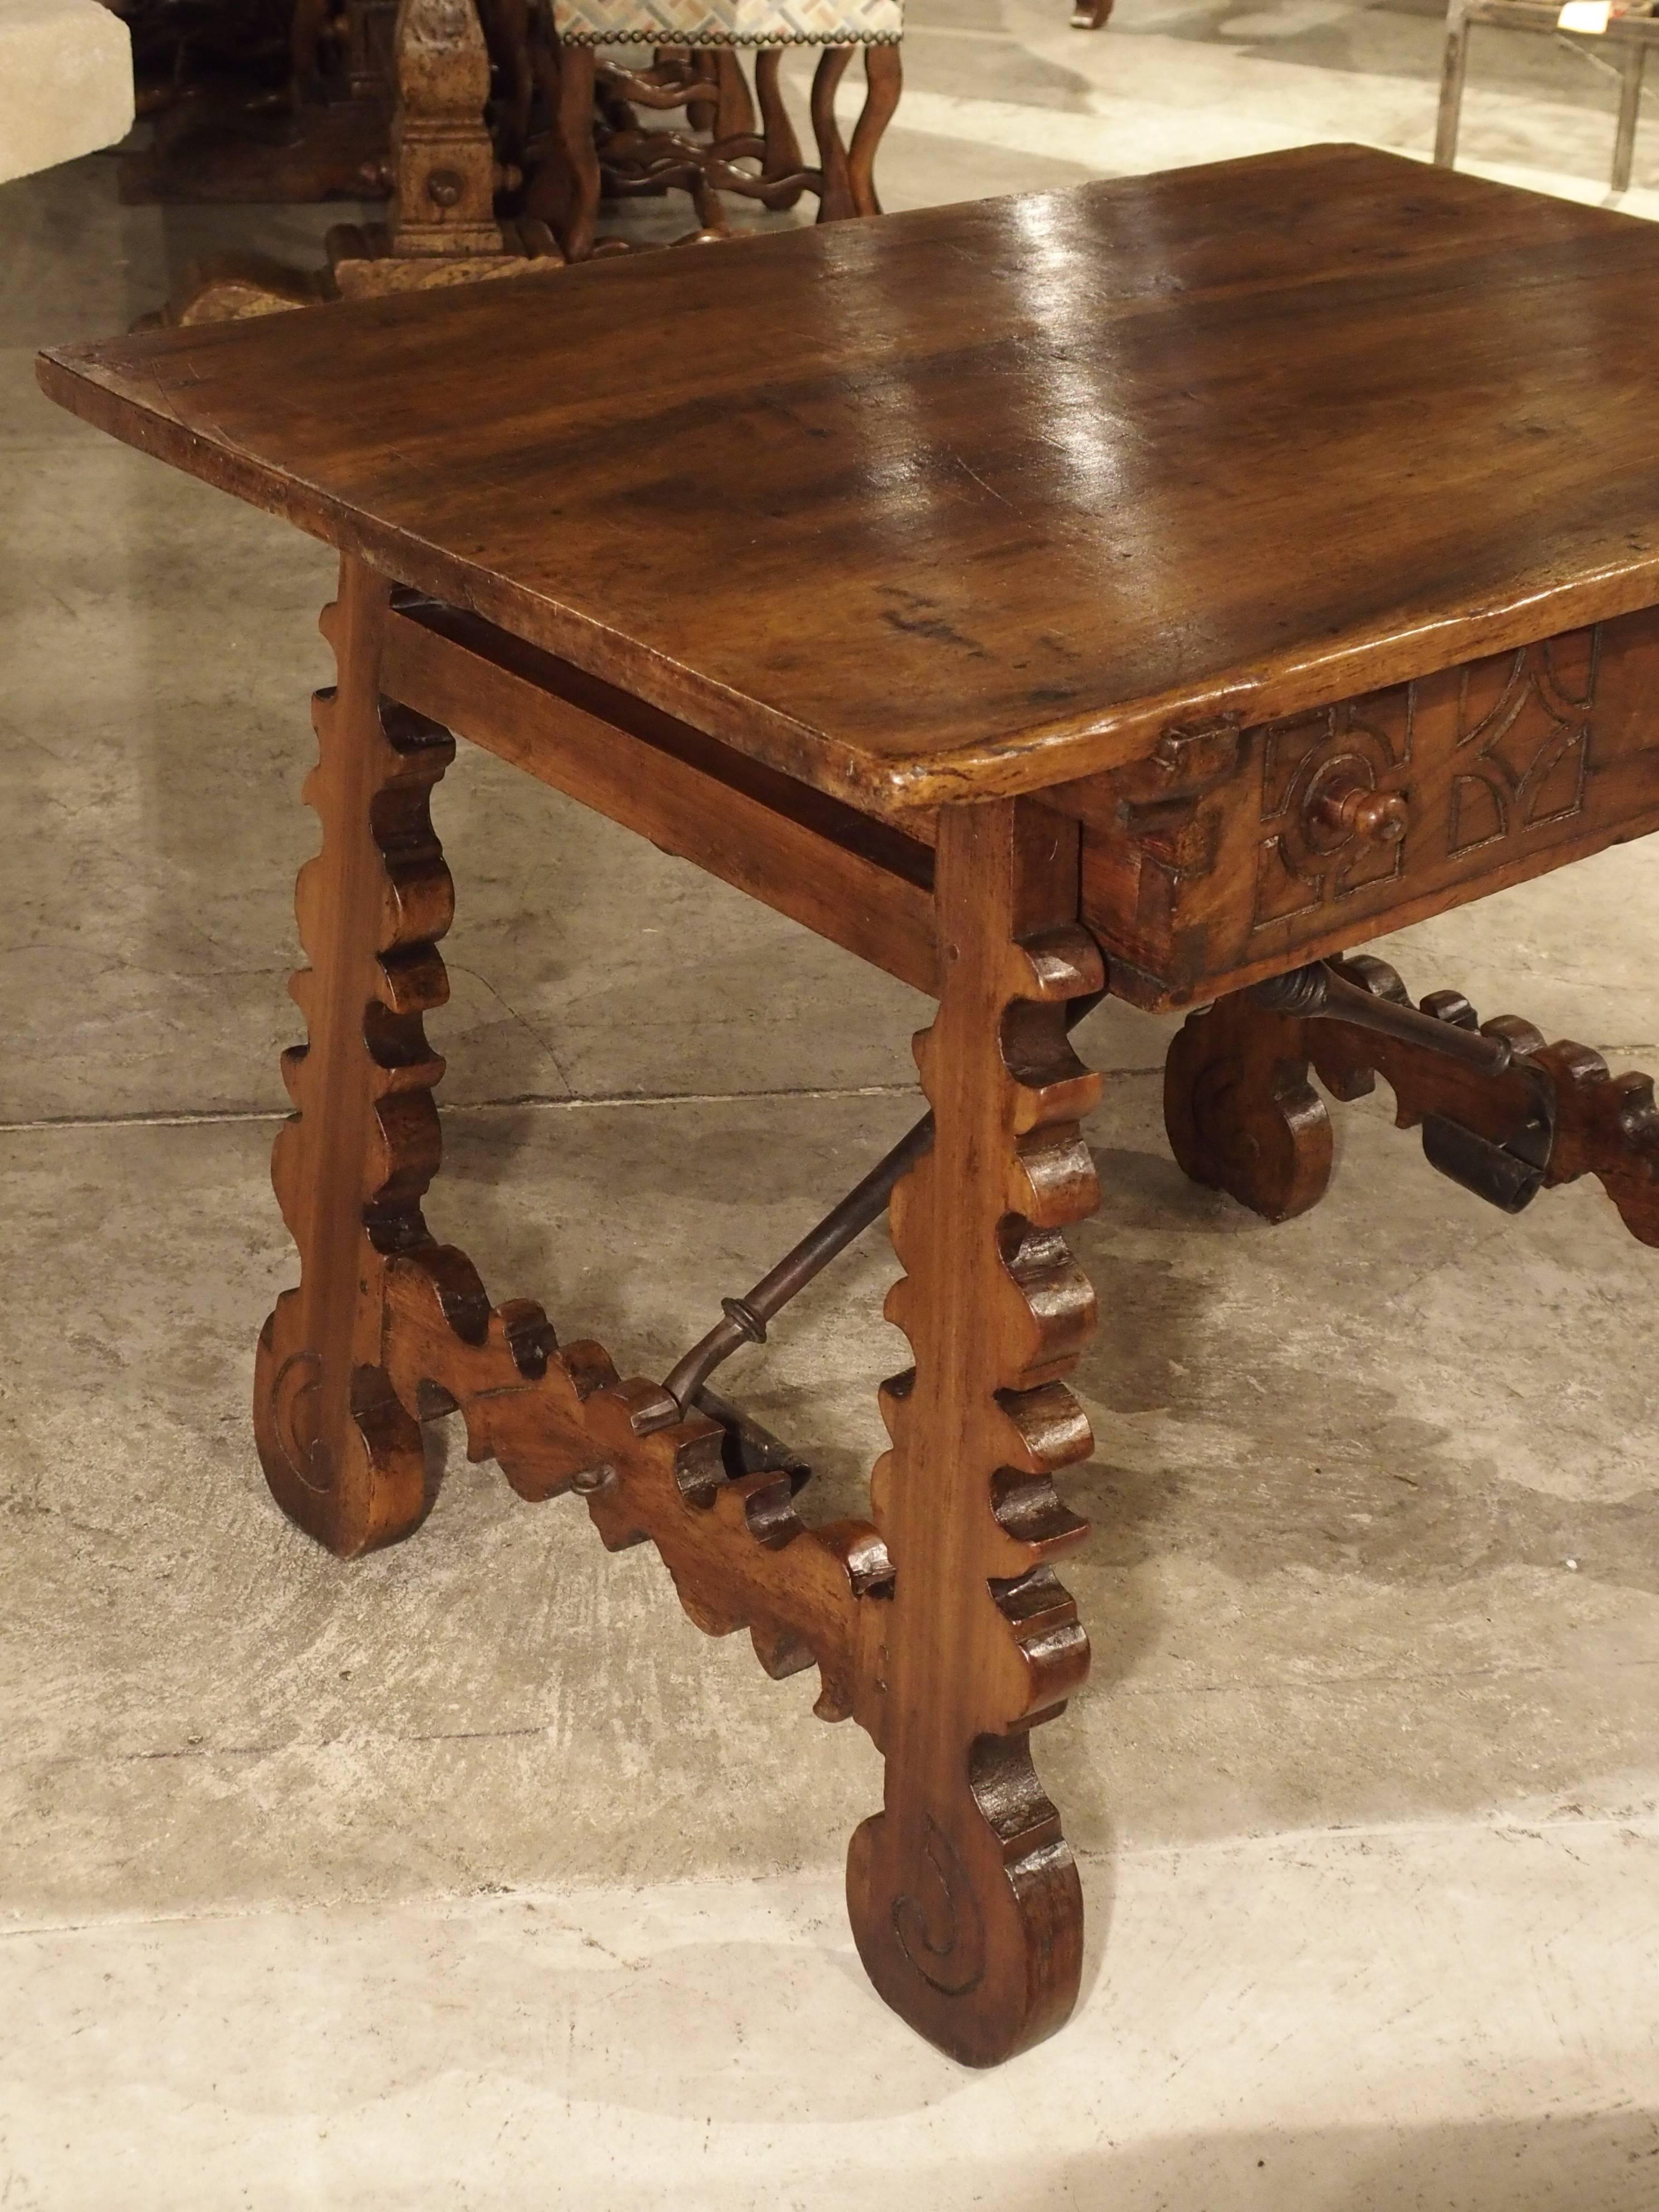 Hand-Carved 17th Century Walnut Wood Table from Northern Spain